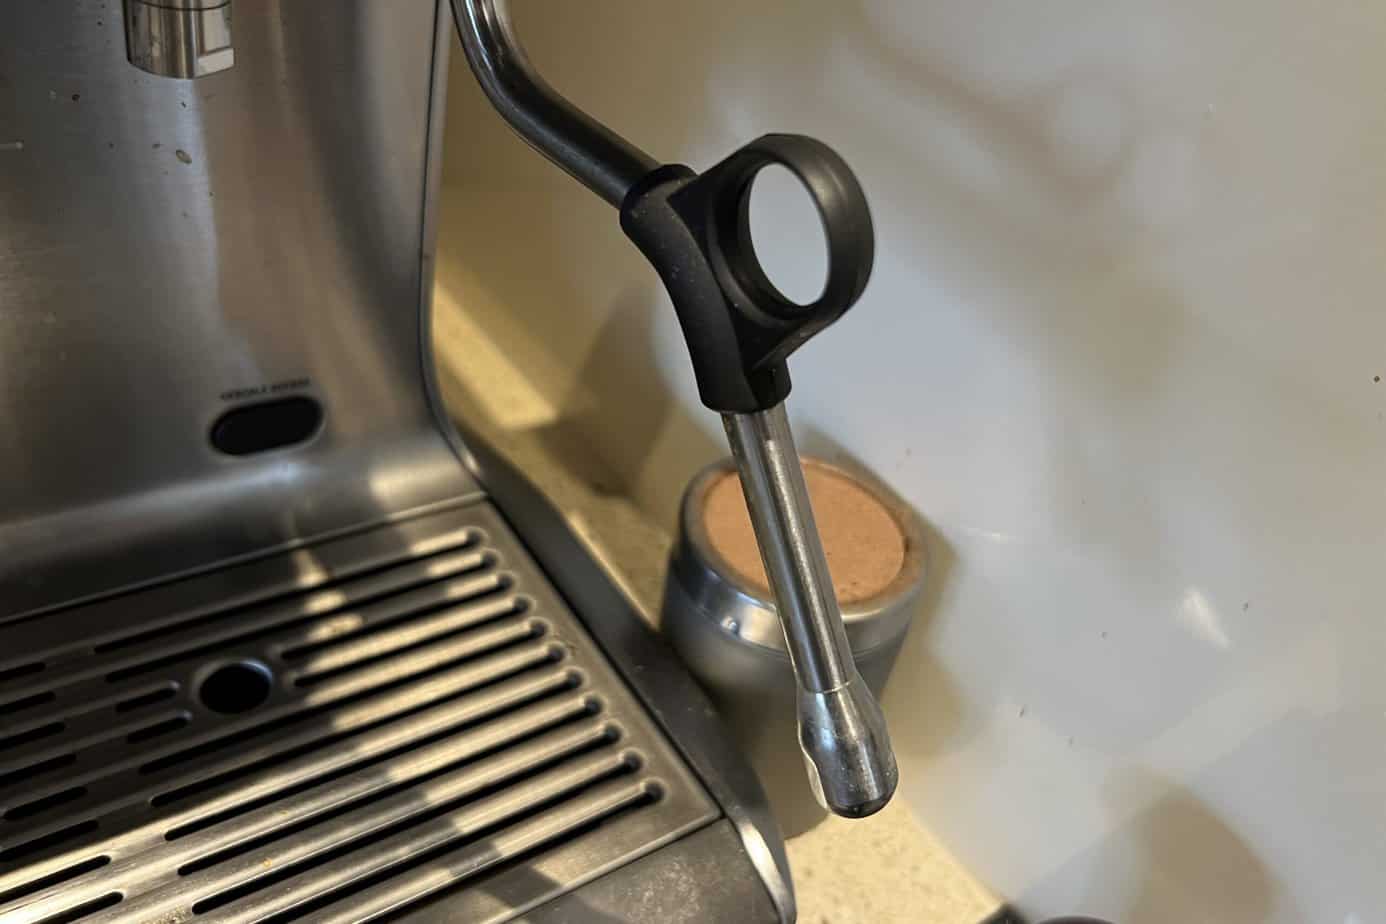 Manual steam wand on Breville